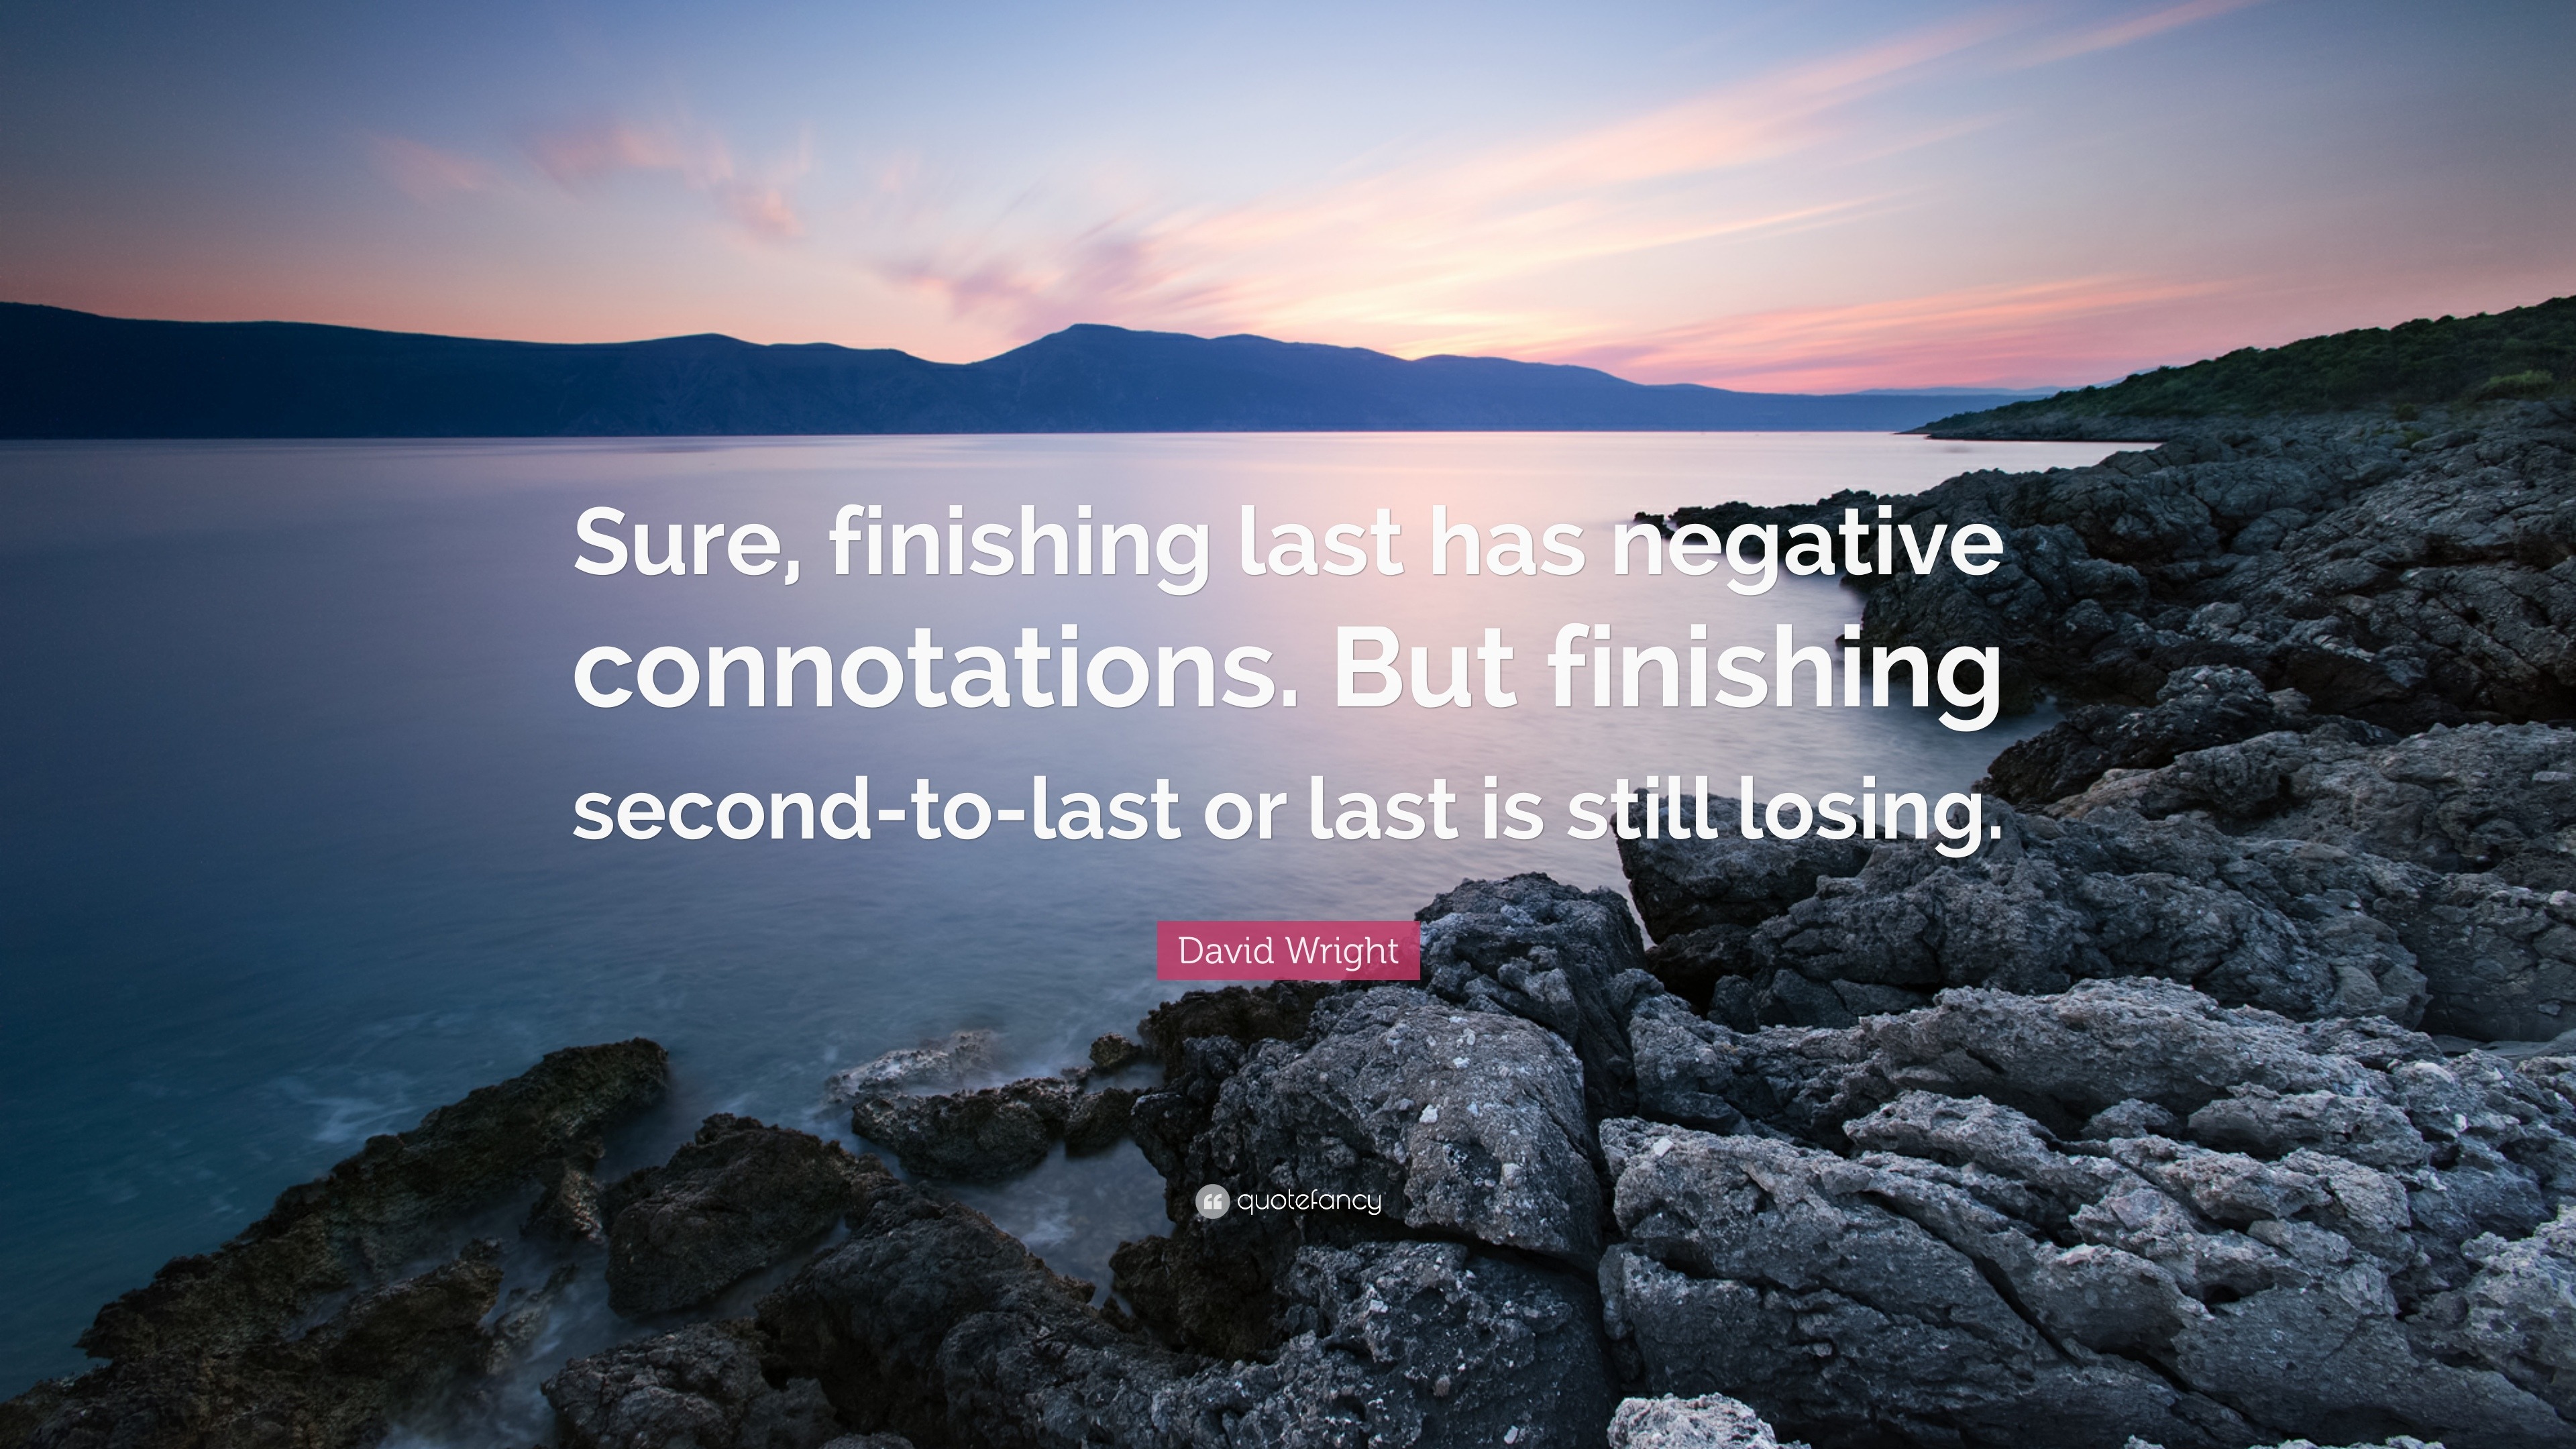 David Wright Quote: “Sure, finishing last has negative connotations. But  finishing second-to-last or last